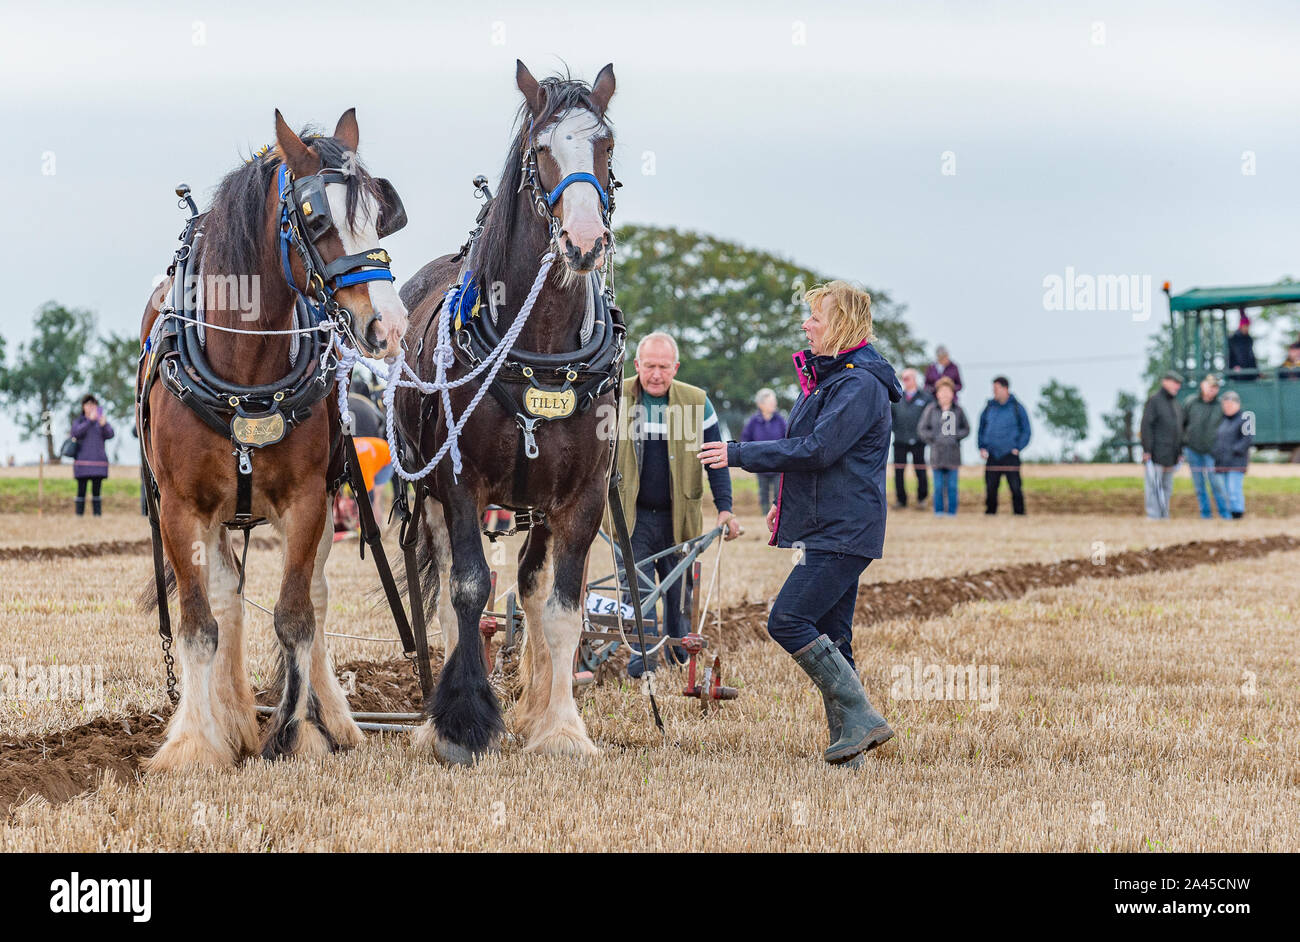 Nocton, Lincoln, Lincolnshire, UK. 12th October 2019.    Over 200 champion ploughmen and women from all over the country have assembled near Lincoln to compete in the 2019 British National Ploughing Championships.  The competition includes many types of plough and styles of ploughing across the 250-acre site; including heavy horses, vintage tractors and steam ploughing engines.  The championships, now in there 69th year, are organised by The Society of Ploughmen with the objective of promoting and encourage the art, skill and science of ploughing the land. Credit: Matt Limb OBE/Alamy Live News Stock Photo